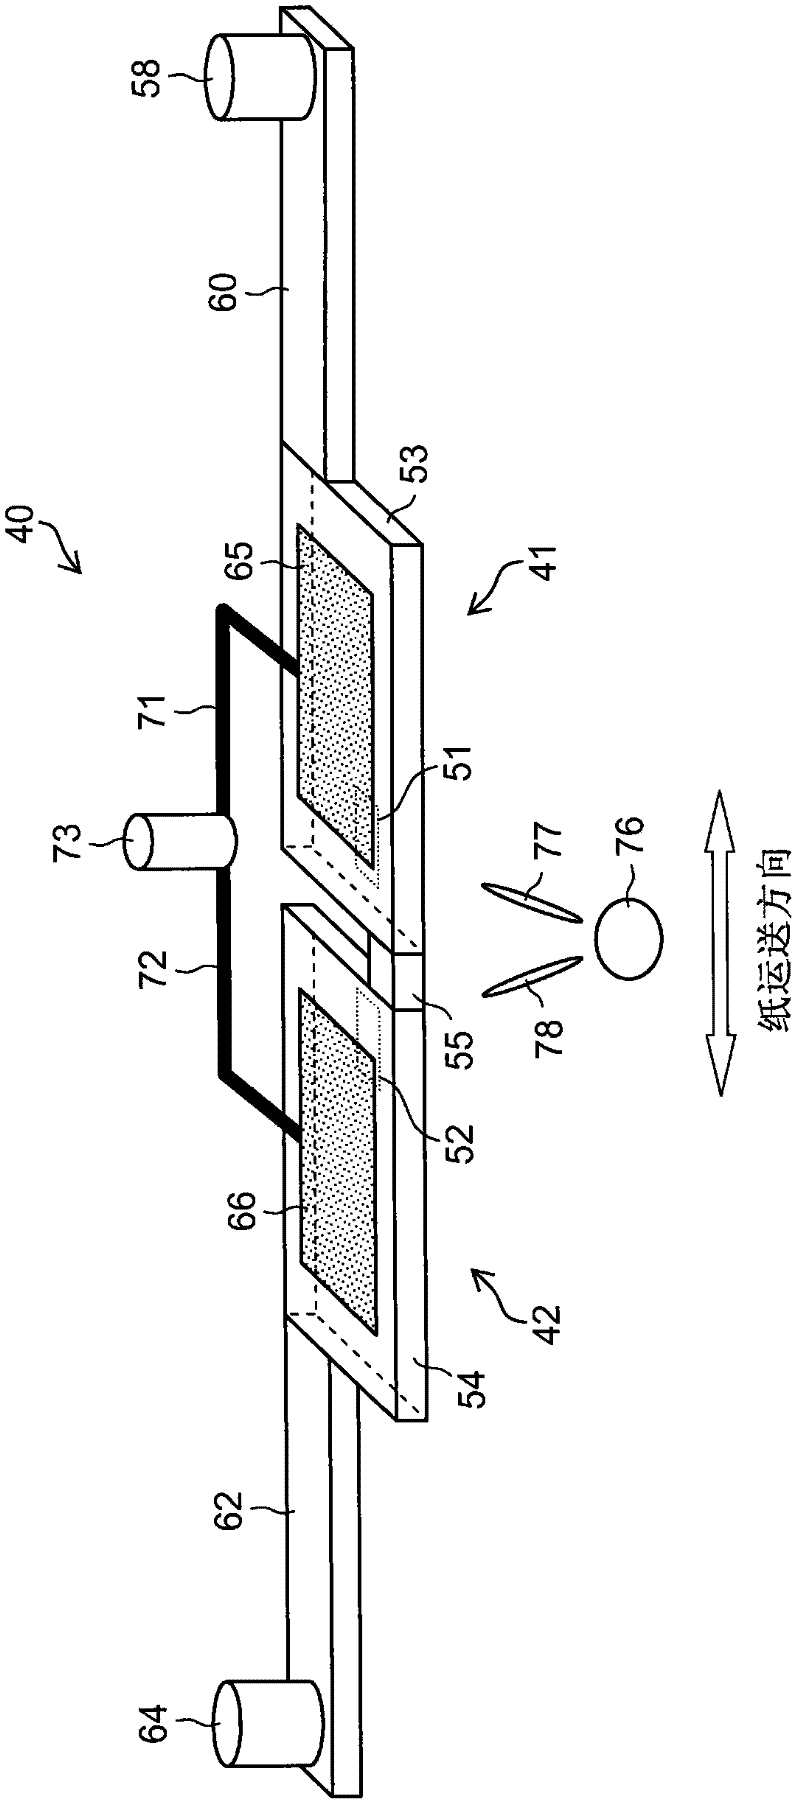 Liquid ejection head, liquid ejection apparatus and inkjet printing apparatus